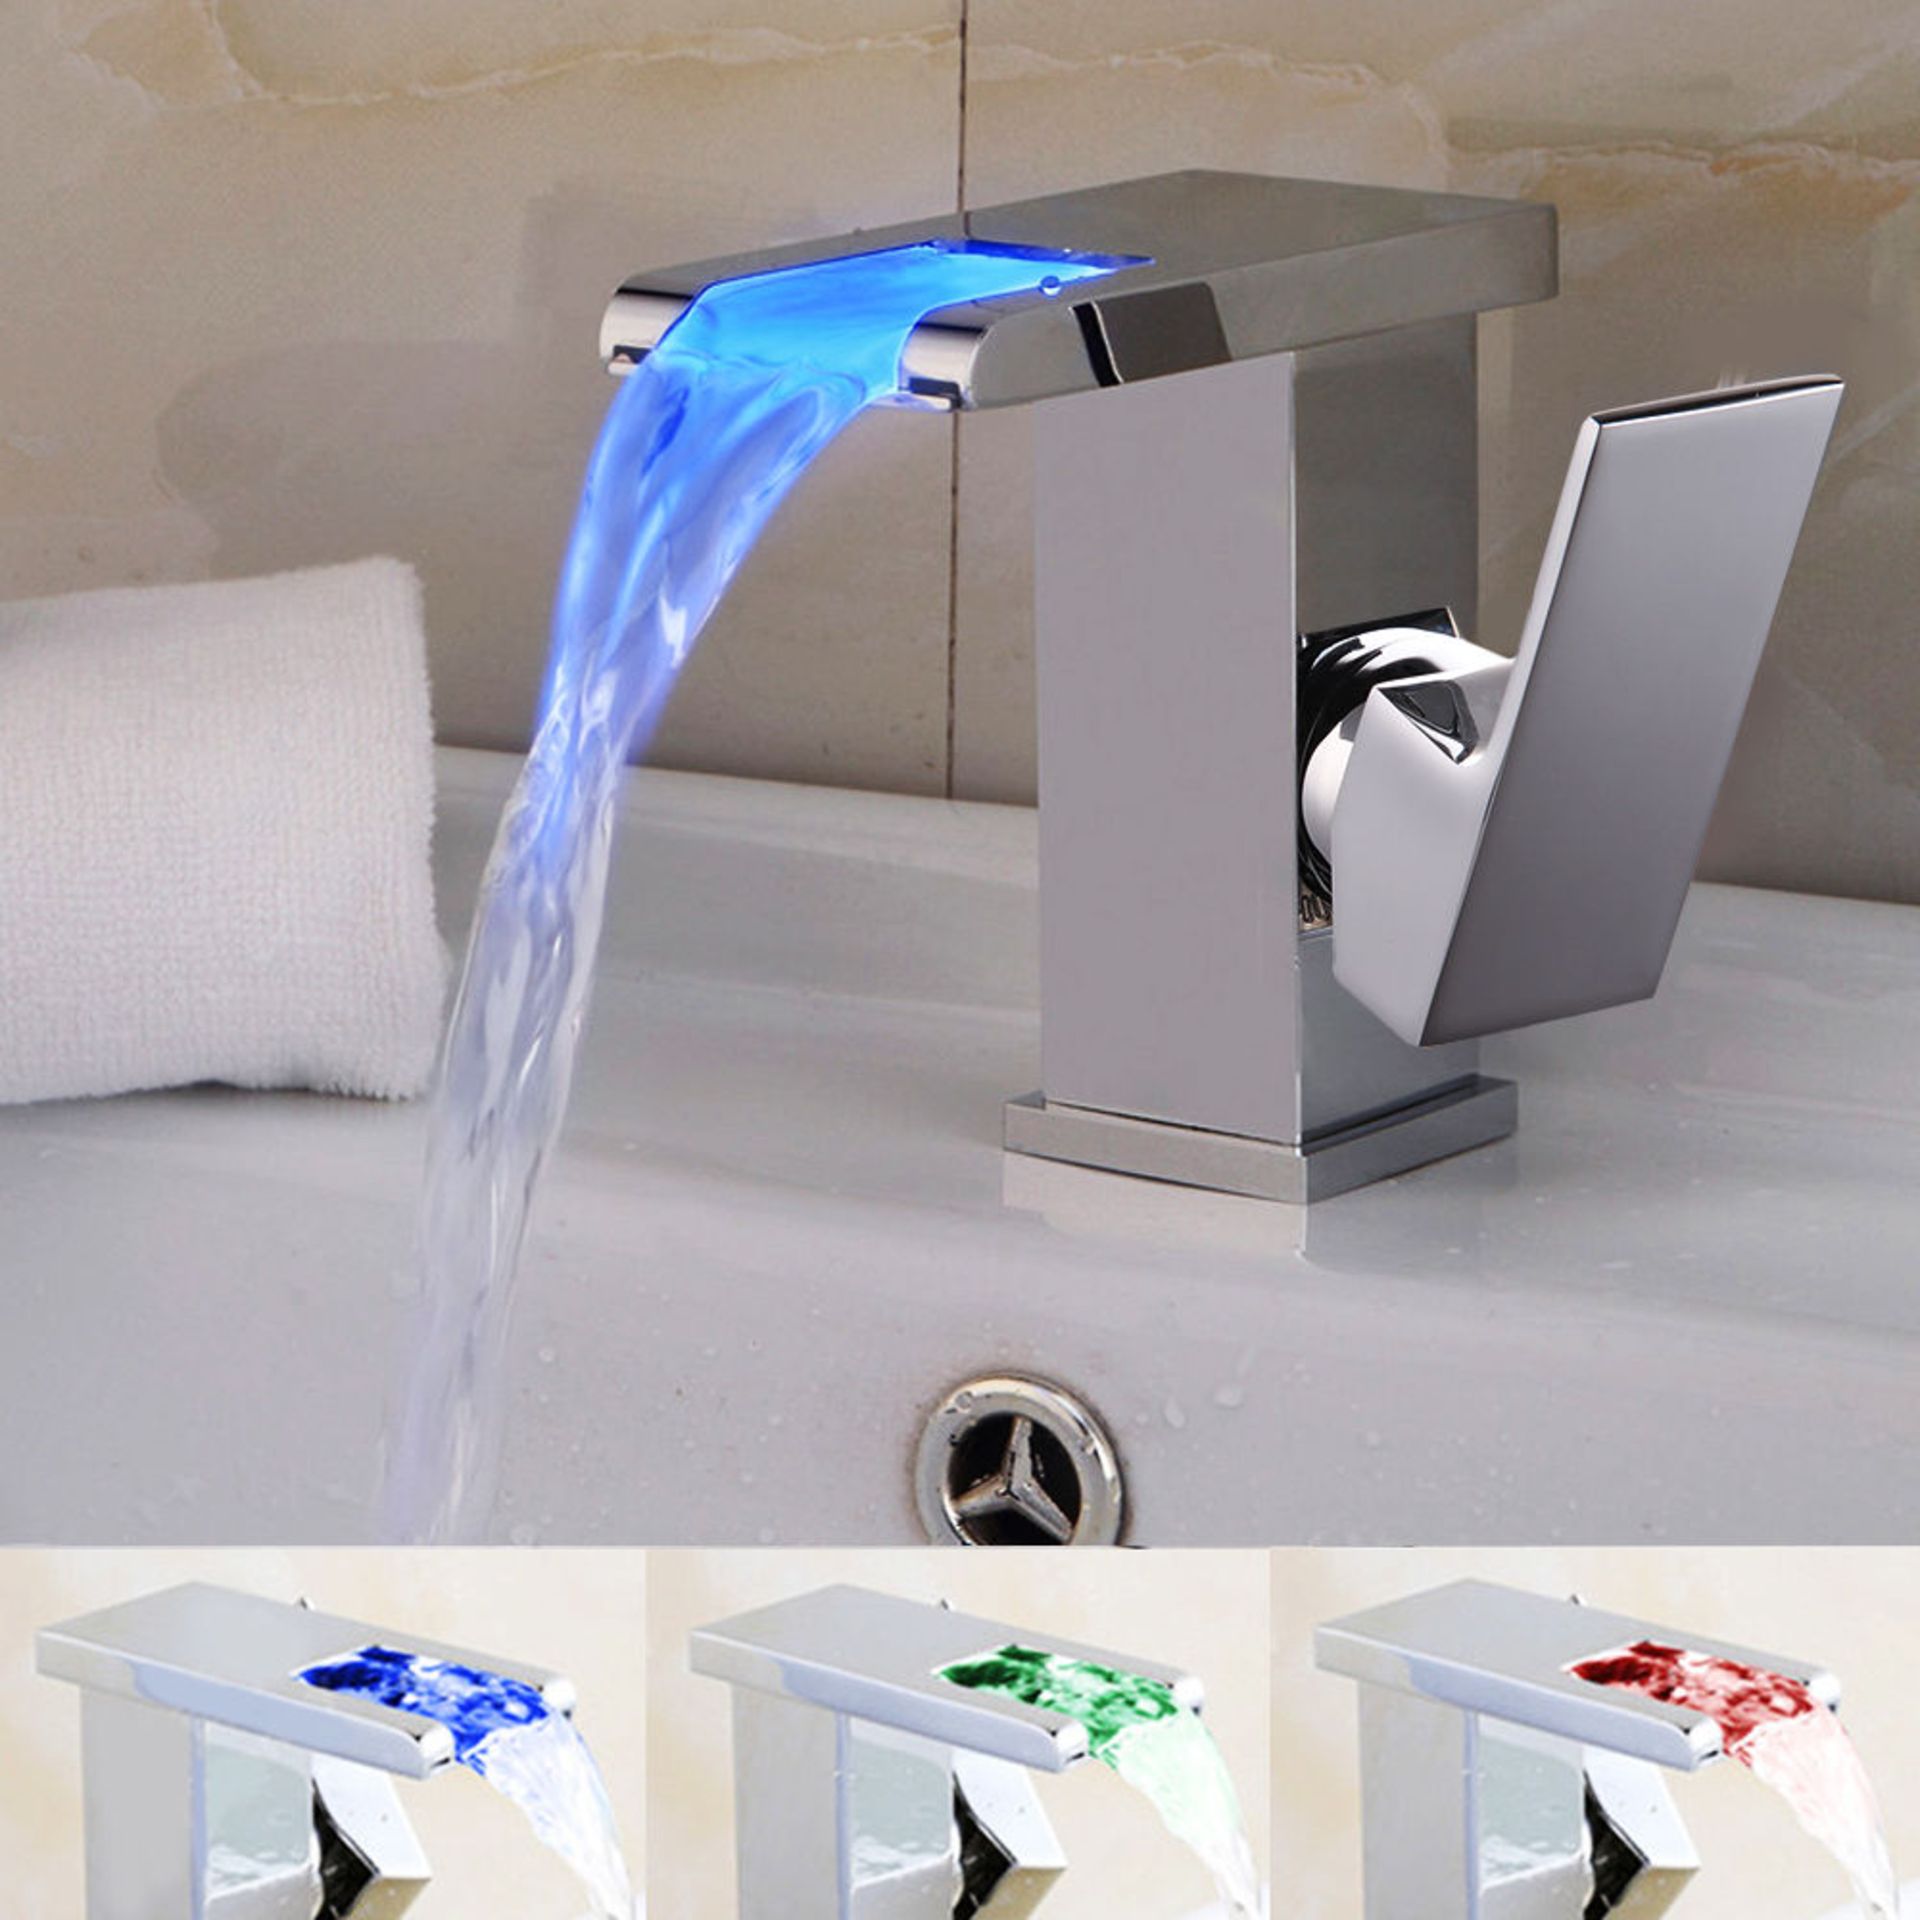 LED Waterfall Bathroom Basin Mixer Tap. RRP £229.99. Easy to install and clean. All copper